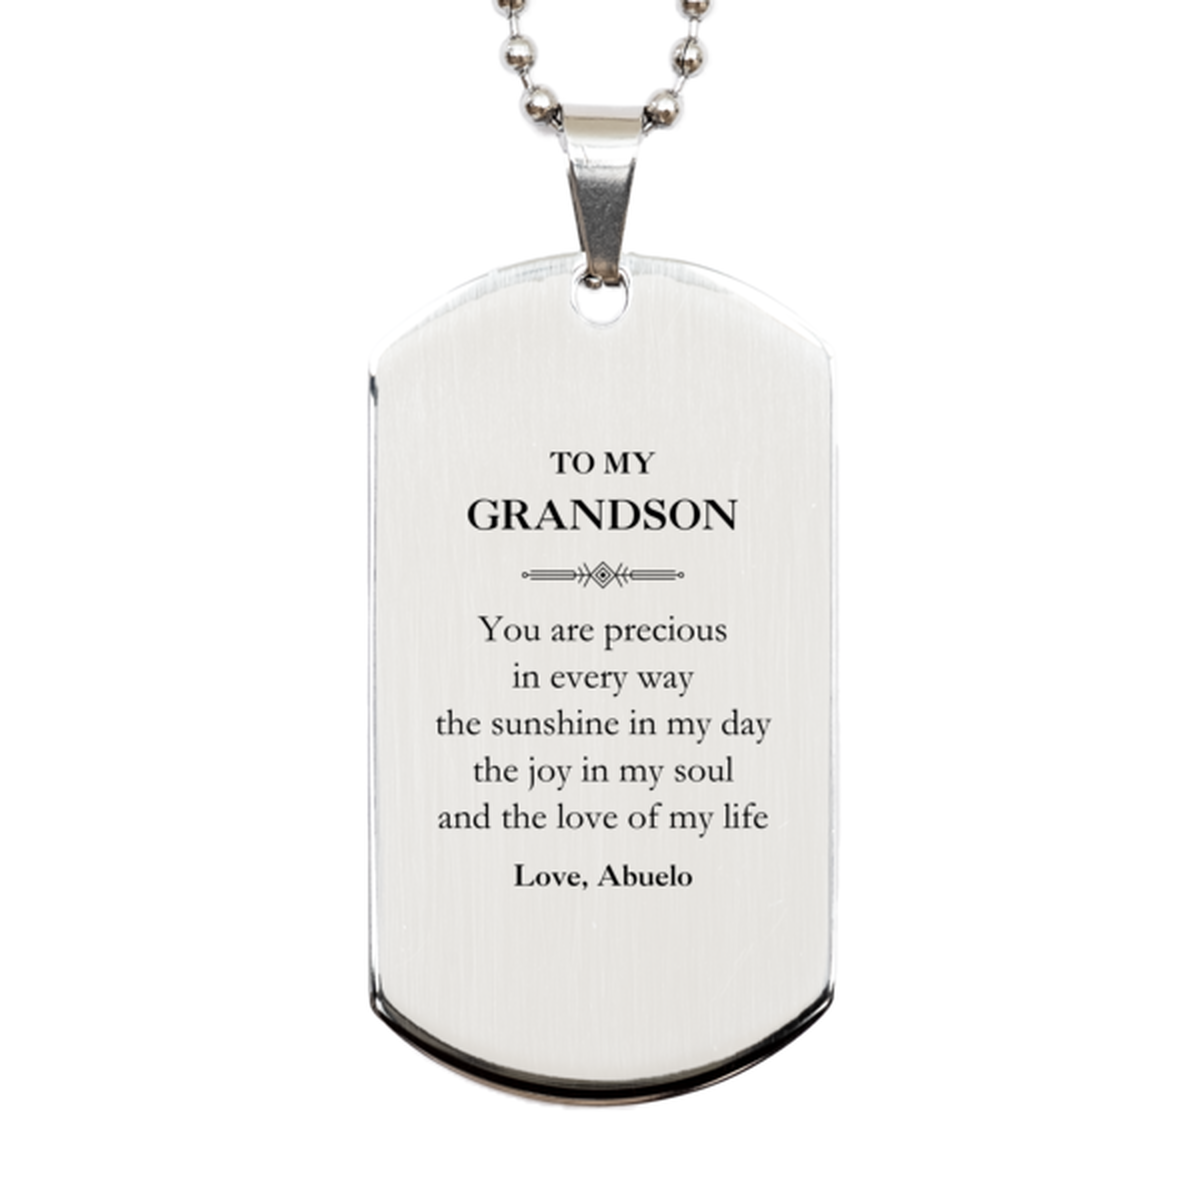 Graduation Gifts for Grandson Silver Dog Tag Present from Abuelo, Christmas Grandson Birthday Gifts Grandson You are precious in every way the sunshine in my day. Love, Abuelo